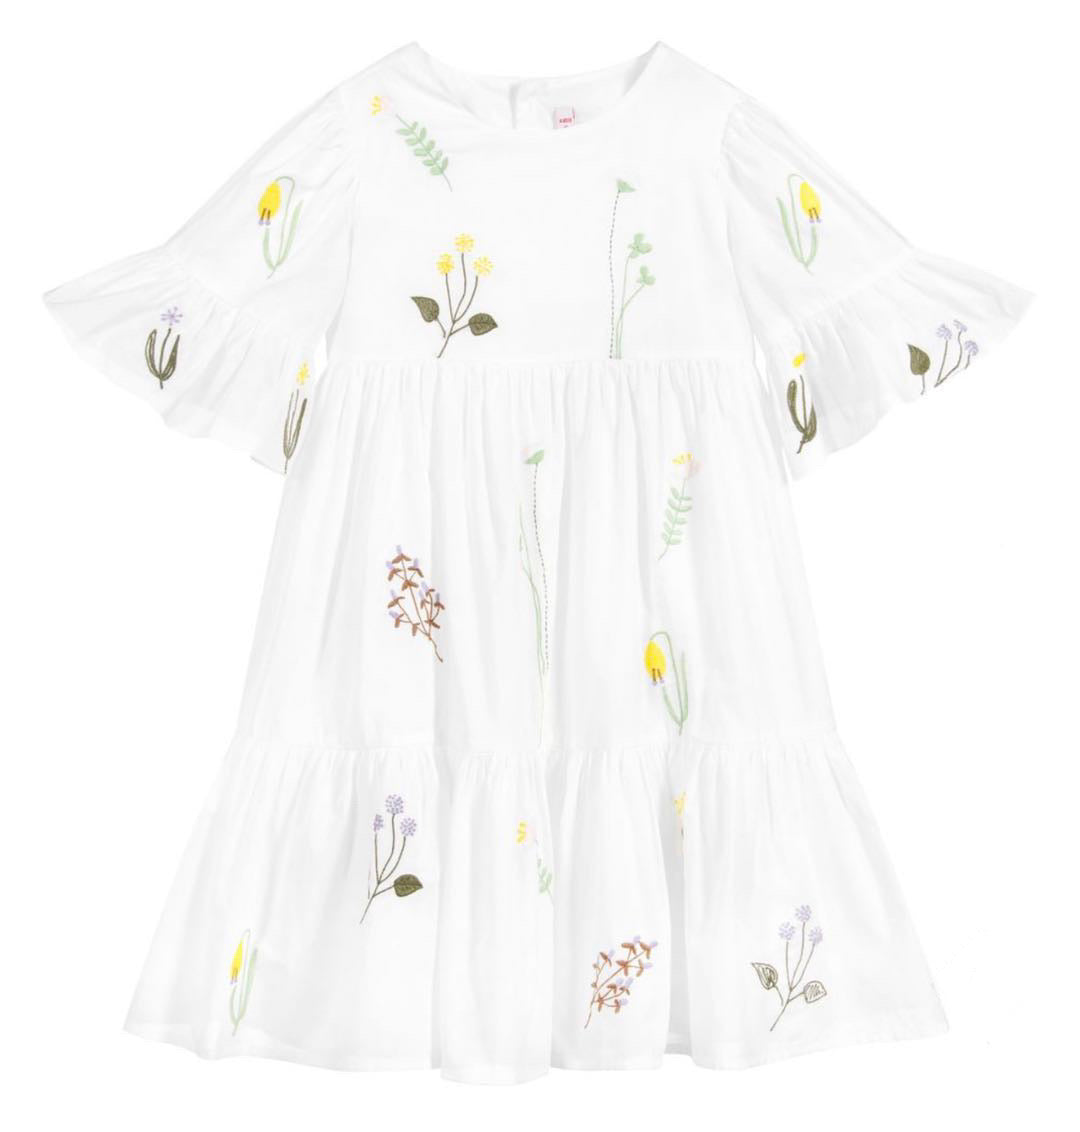 KID GIRL SS FLOWER EMBROIDERY TIERED DRESS, WHITE - C??marose Canada